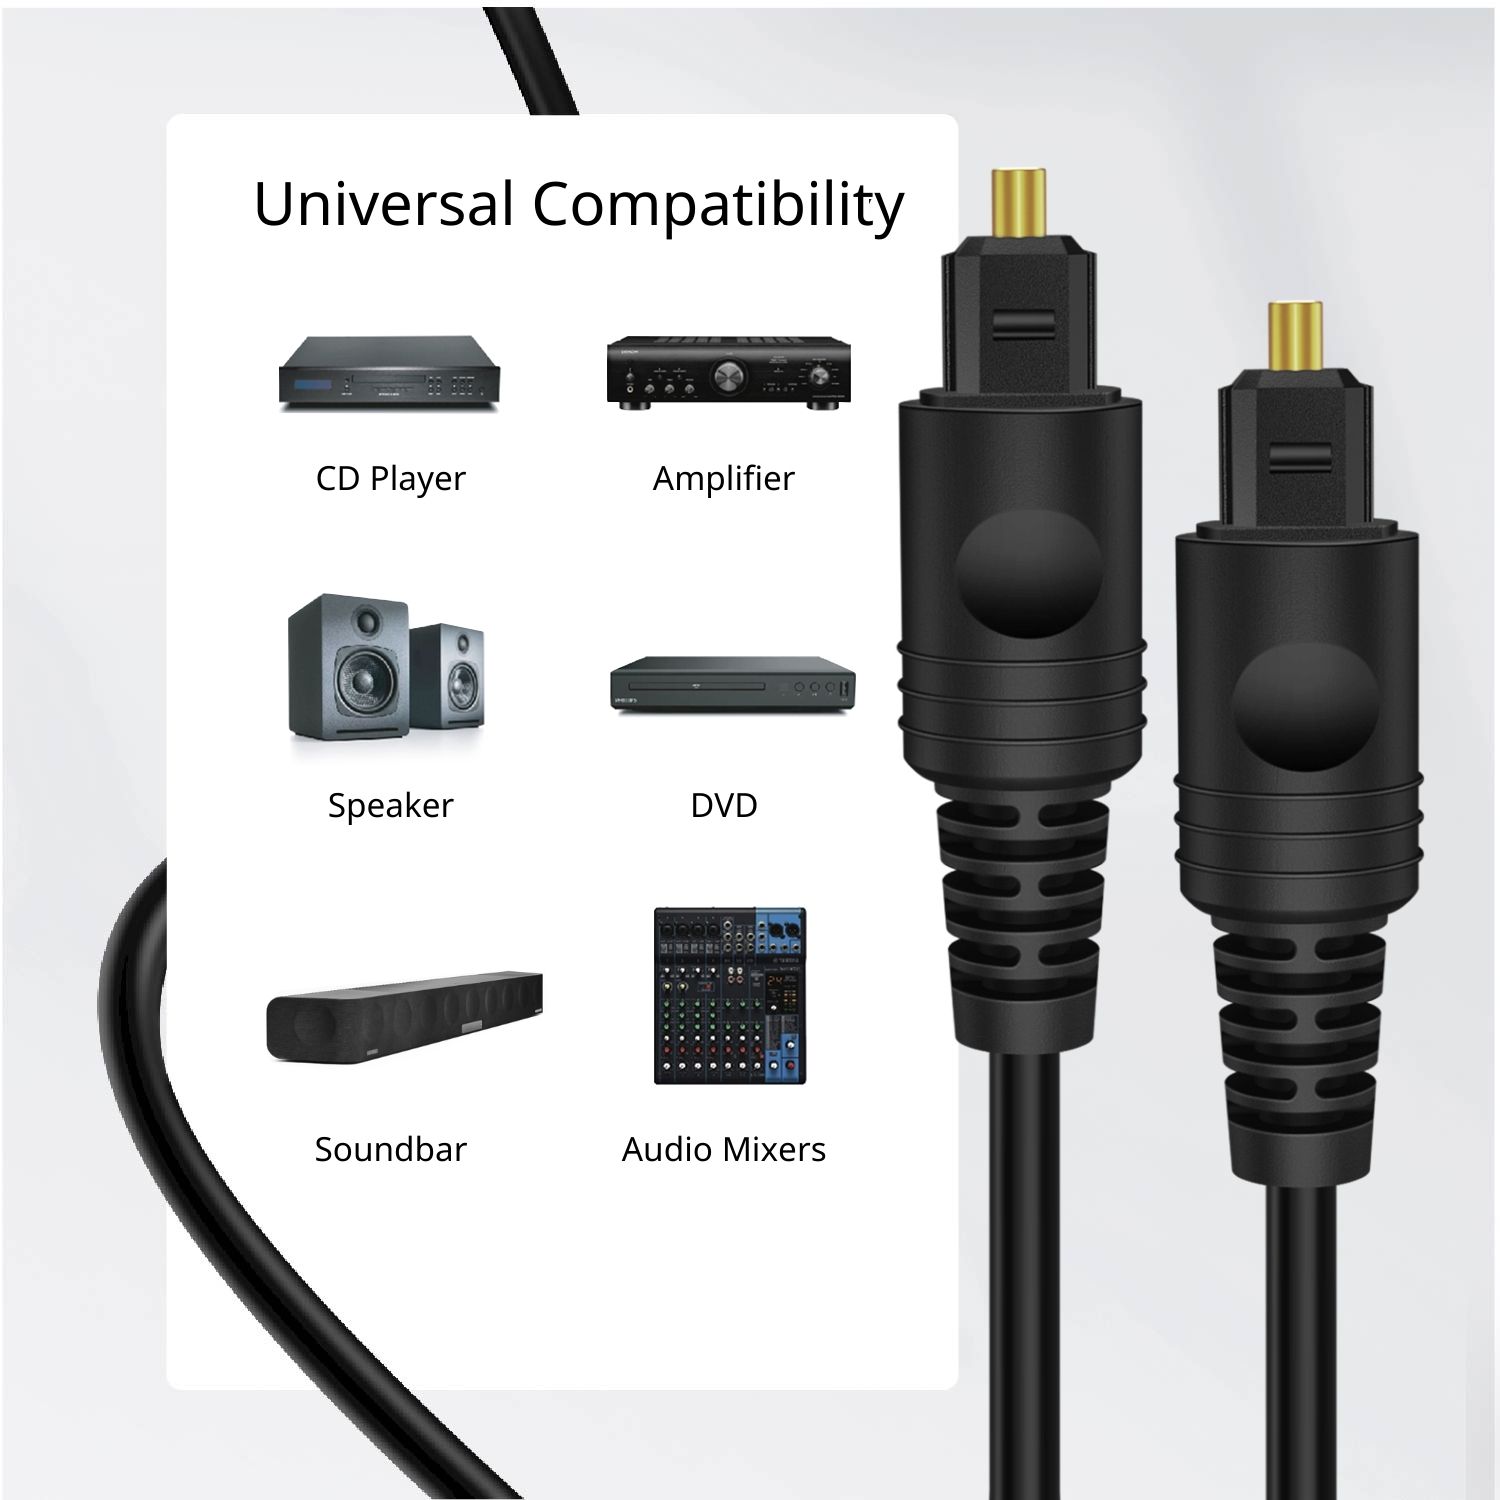 Interference Free - Fiber-optic design, the cable itself won't have to deal with any interference from radio (RFI) or electromagnetic (EMI) frequencies. Solid-core bass conductor optimizes low-frequency signal transfer for improved bass response for the ultimate listening experience